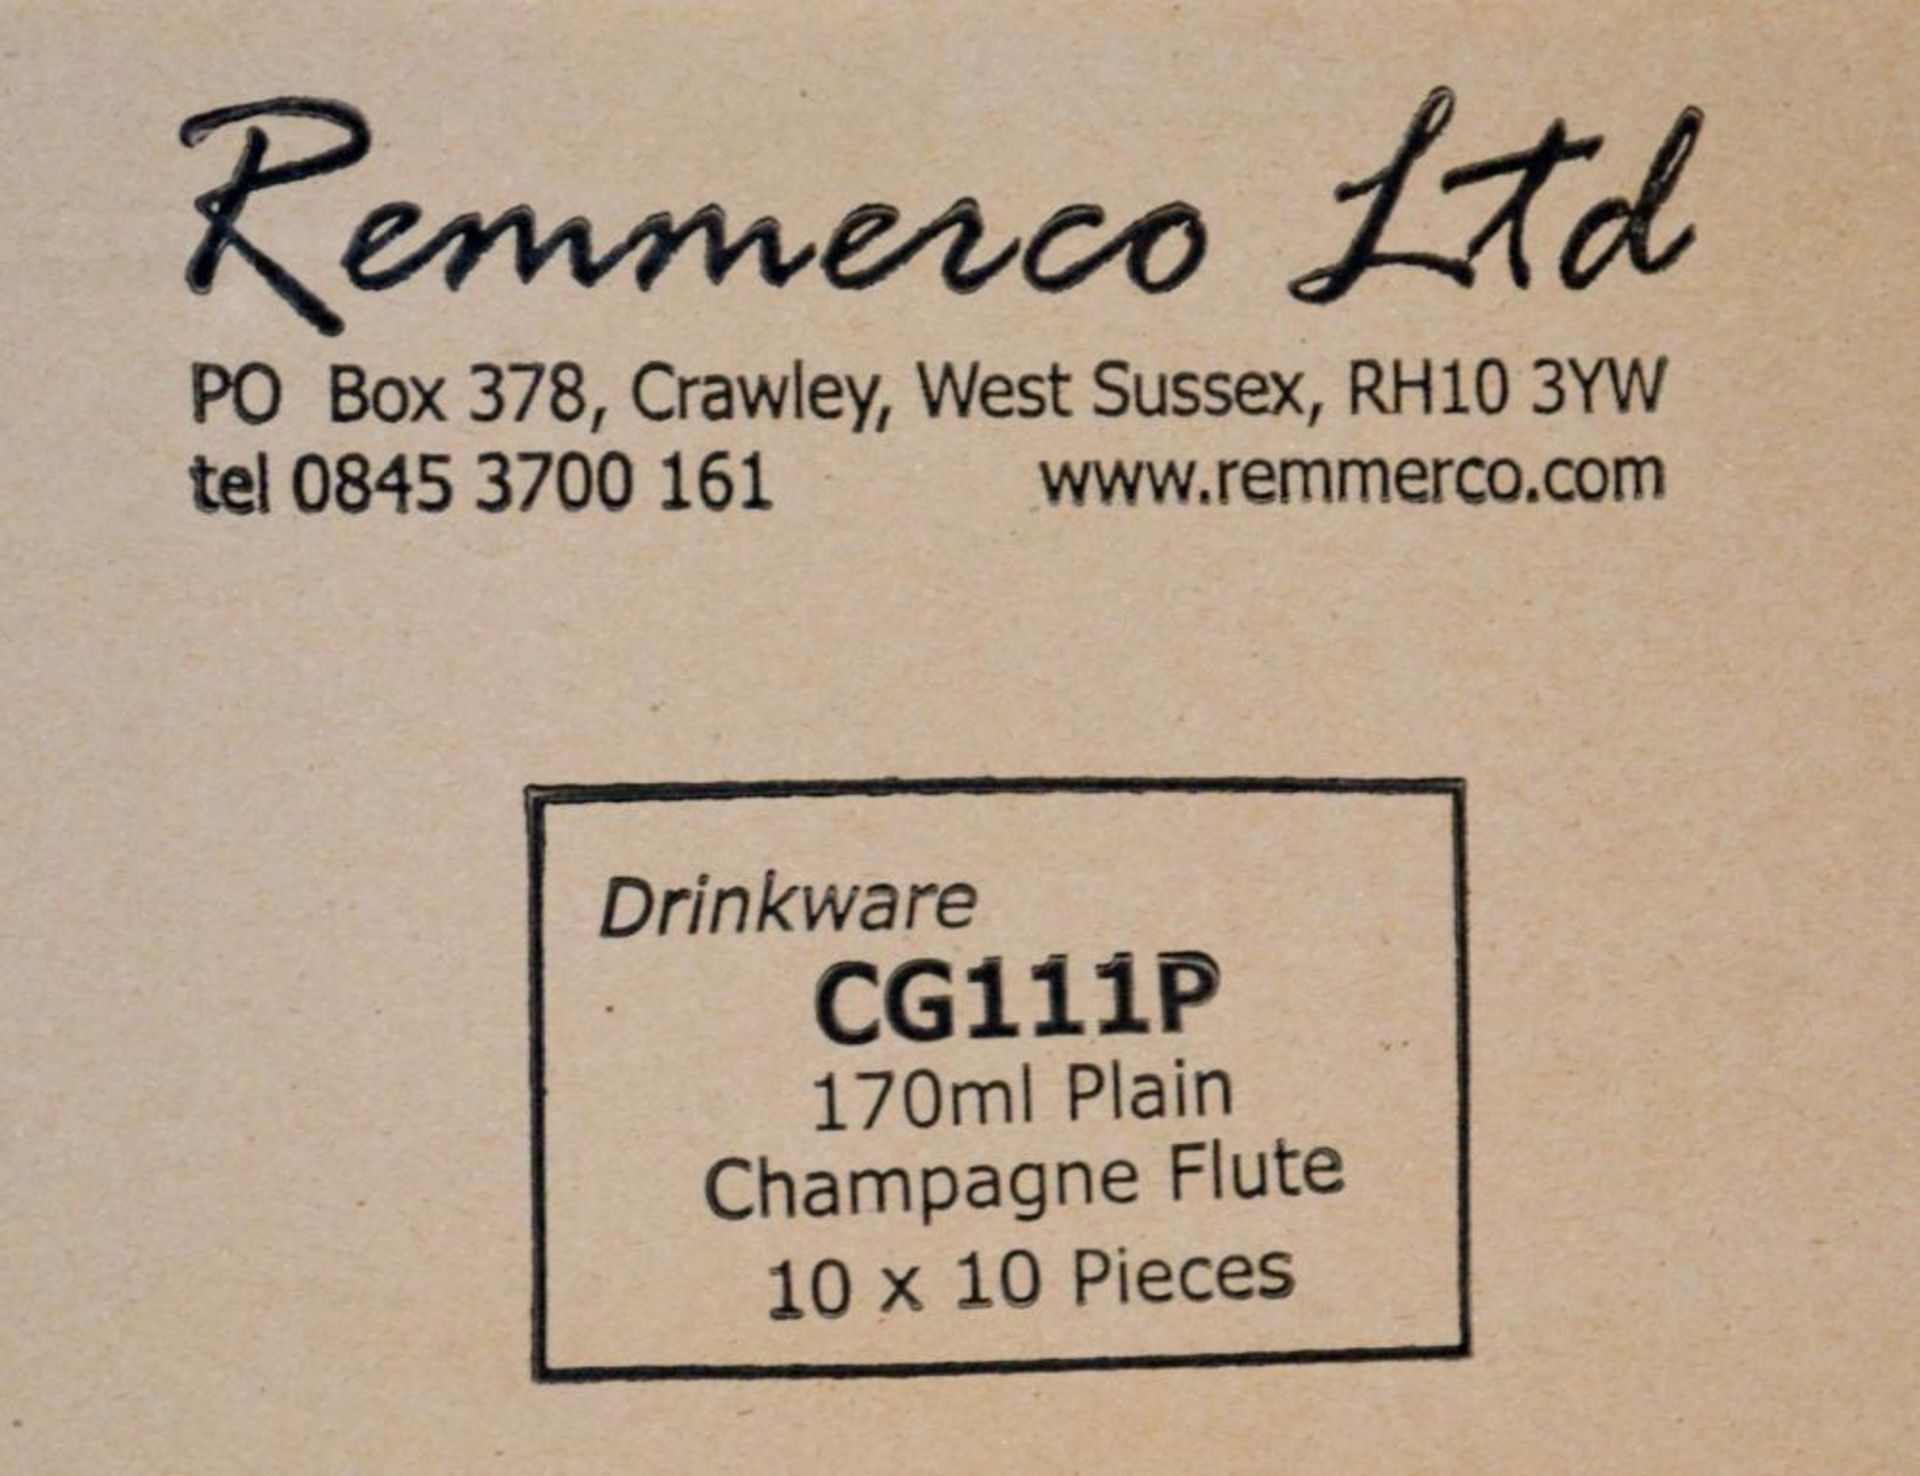 400 x Disposable Clear Plastic Champagne Flutes (170ml) - Brand: Remmerco CG111P - Brand New - Image 3 of 4